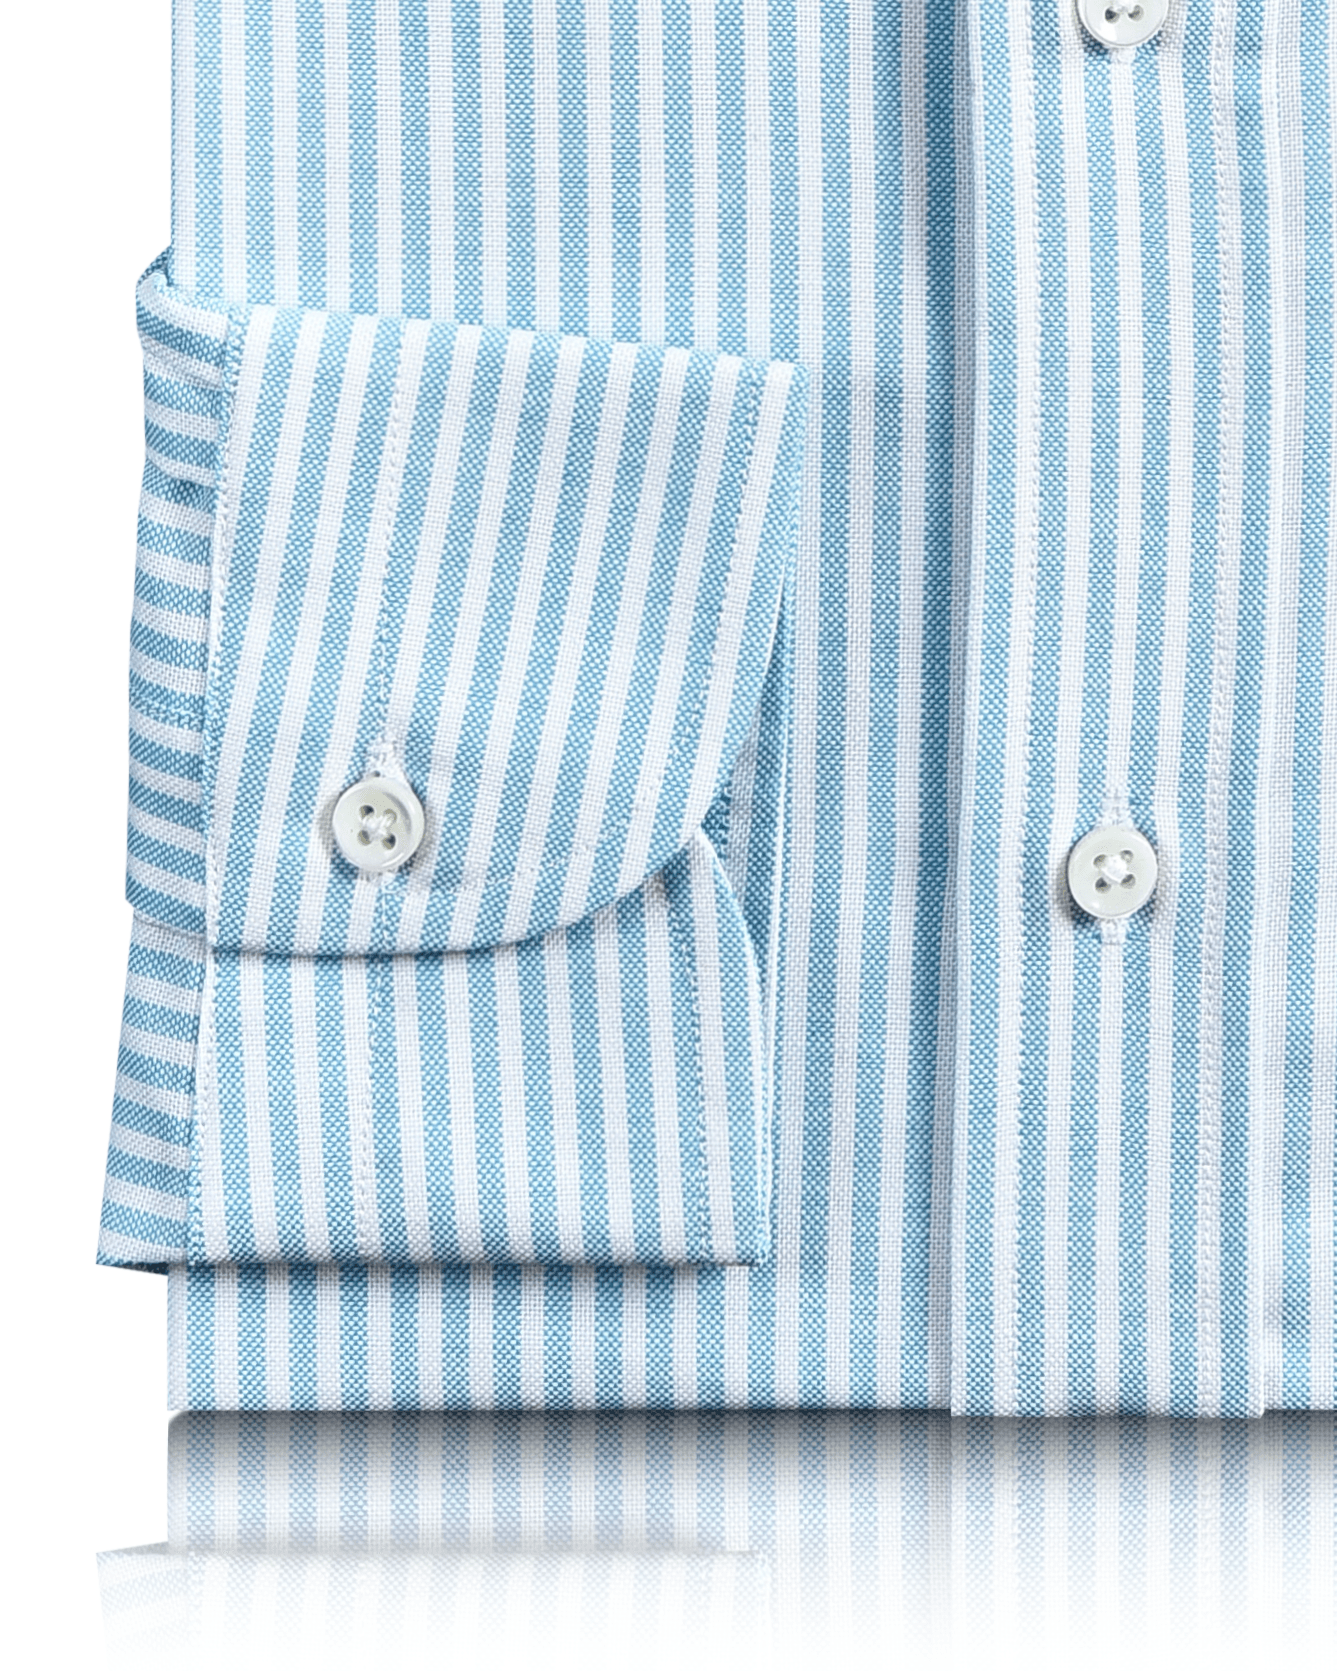 Cuff of the custom oxford shirt for men by Luxire in ferozi blue on white university stripes